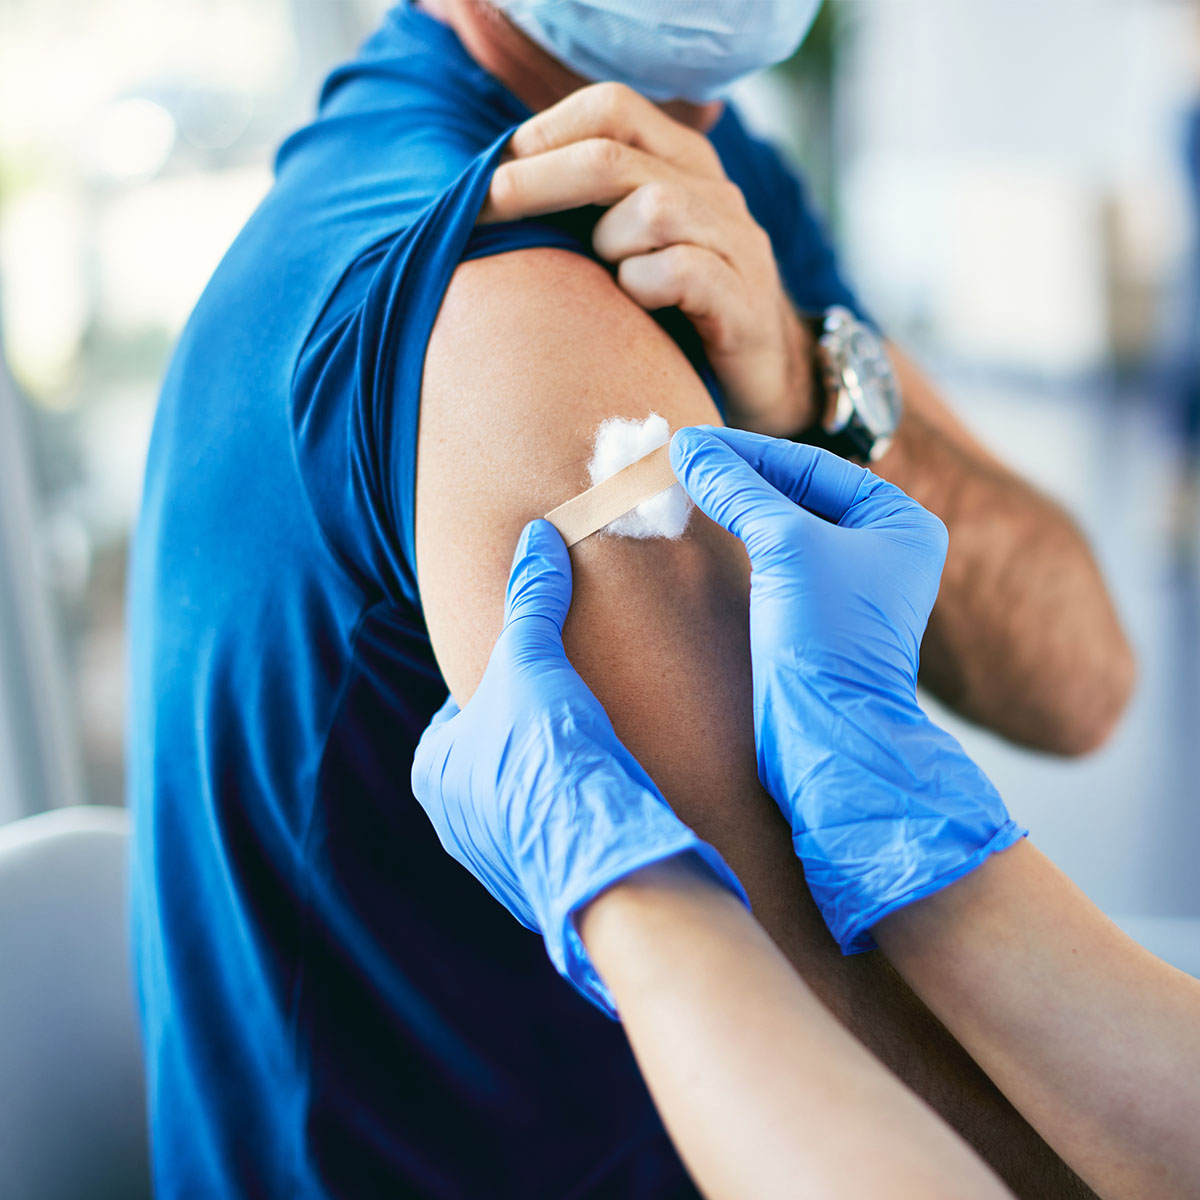 A patient receives a bandage after getting a vaccination.